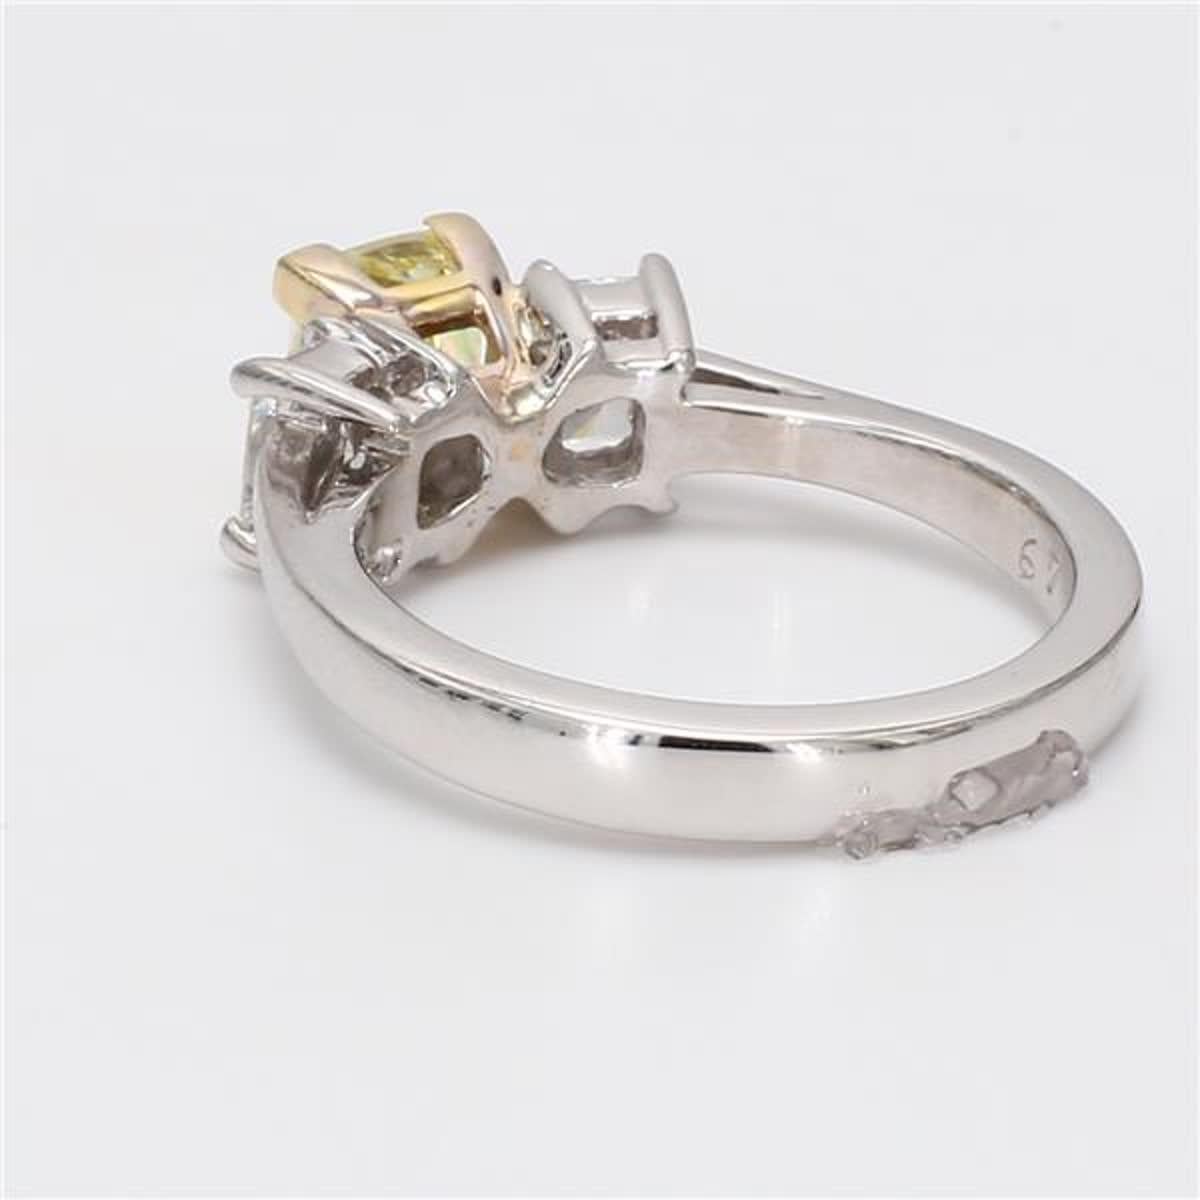 RareGemWorld's classic GIA certified diamond ring. Mounted in a beautiful 14K Yellow and White Gold setting with a natural cushion cut yellow diamond complimented by natural radiant cut white diamonds. This ring is guaranteed to impress and enhance